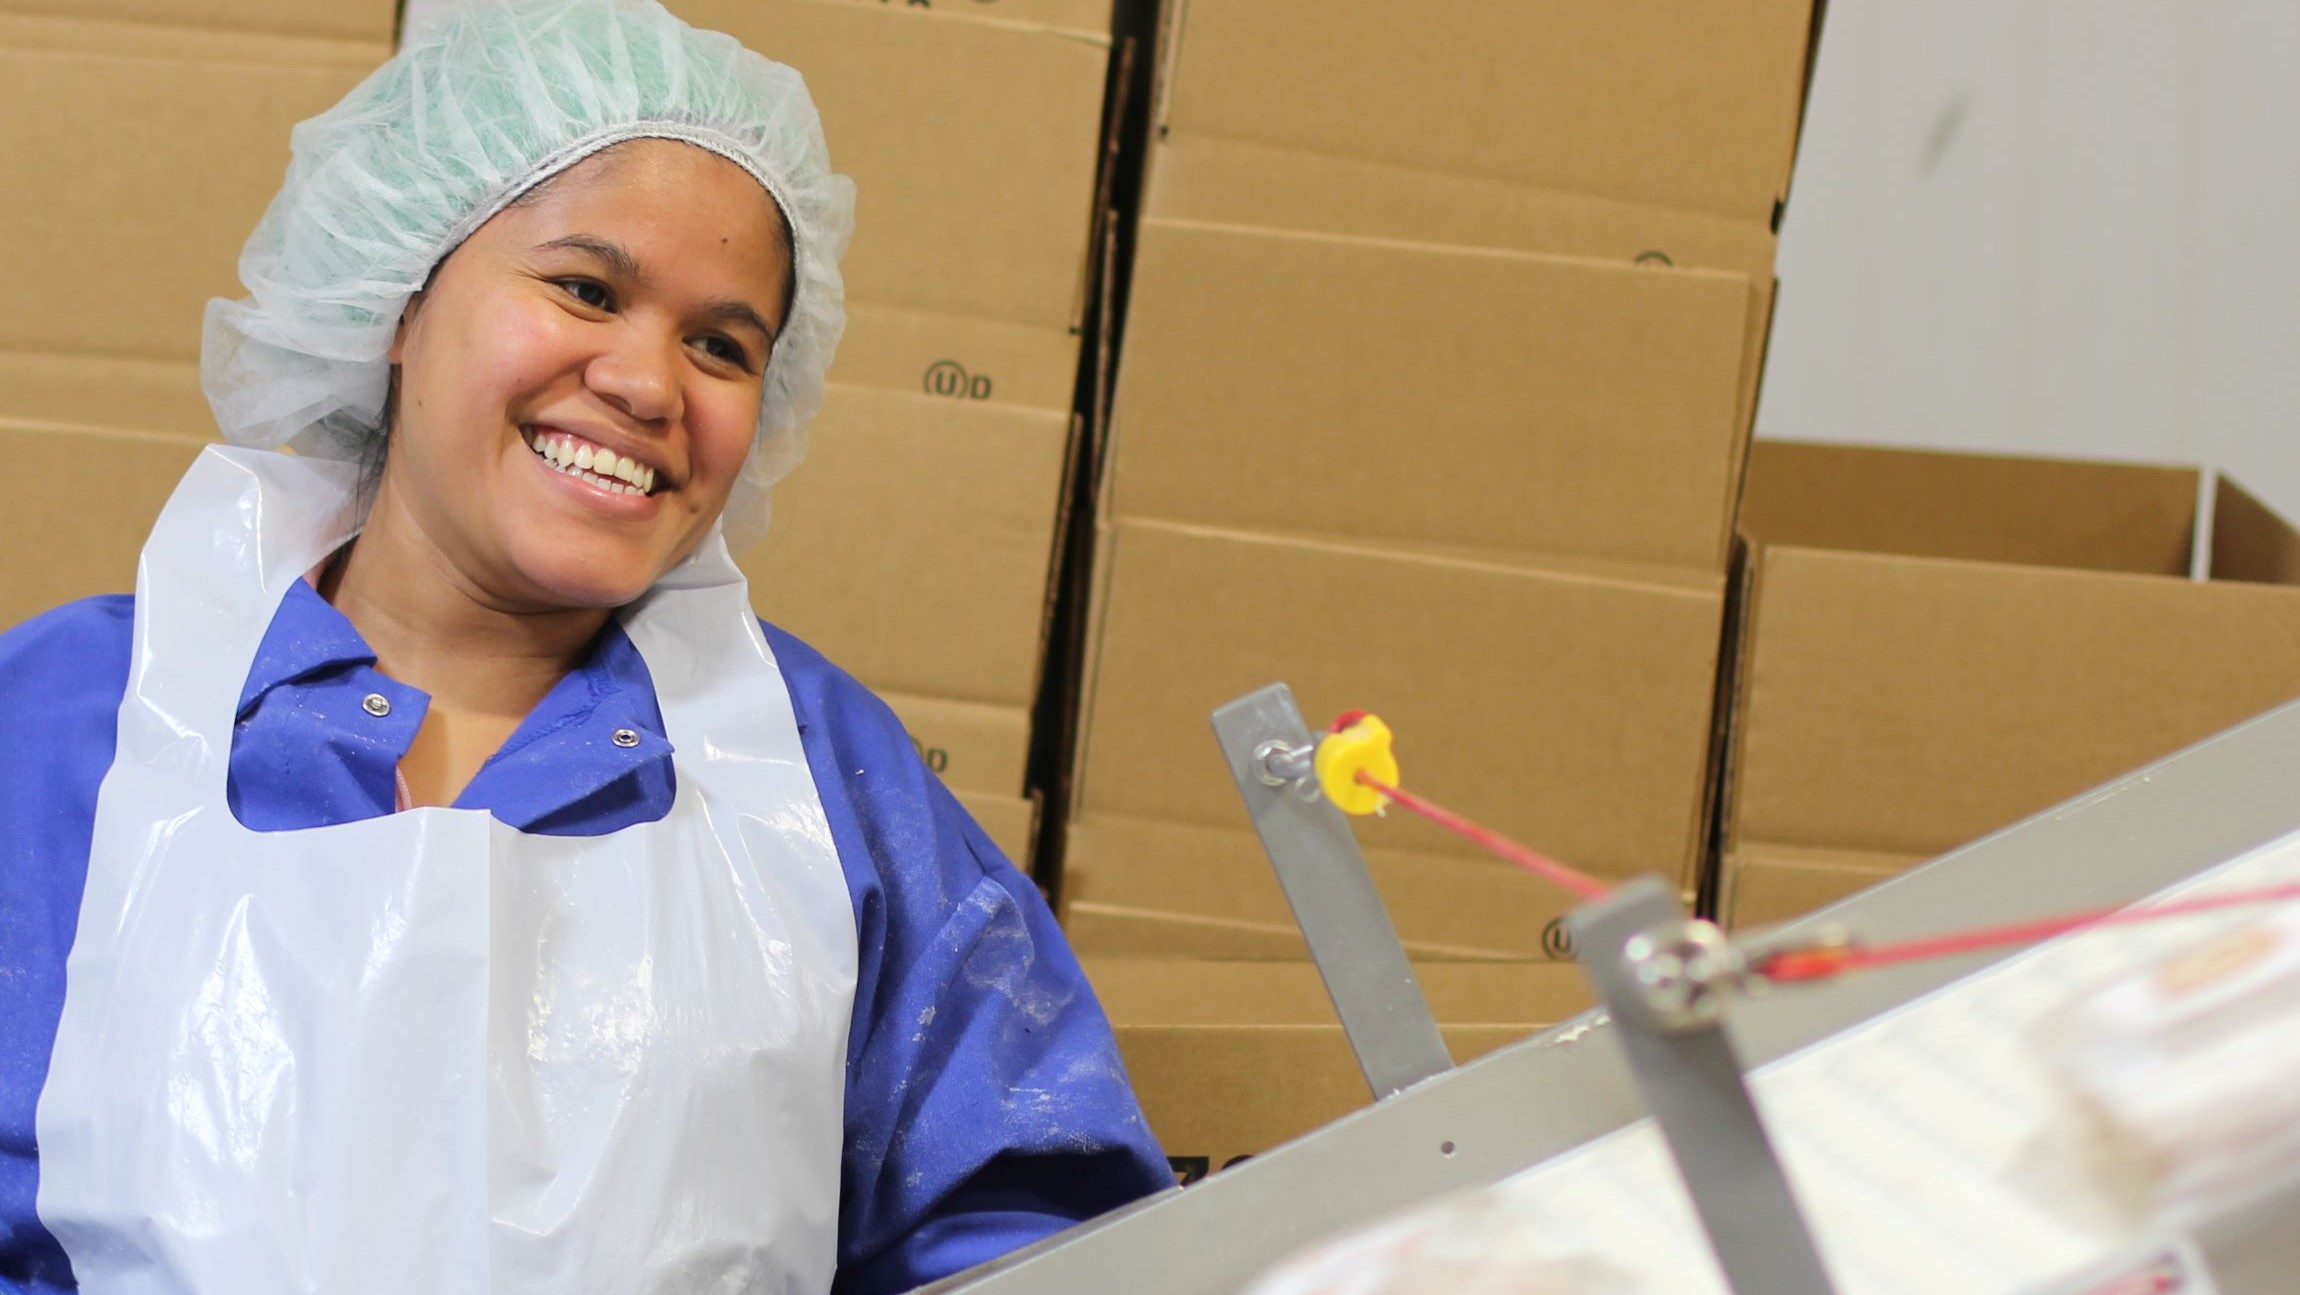 Production employee smiling while packaging product